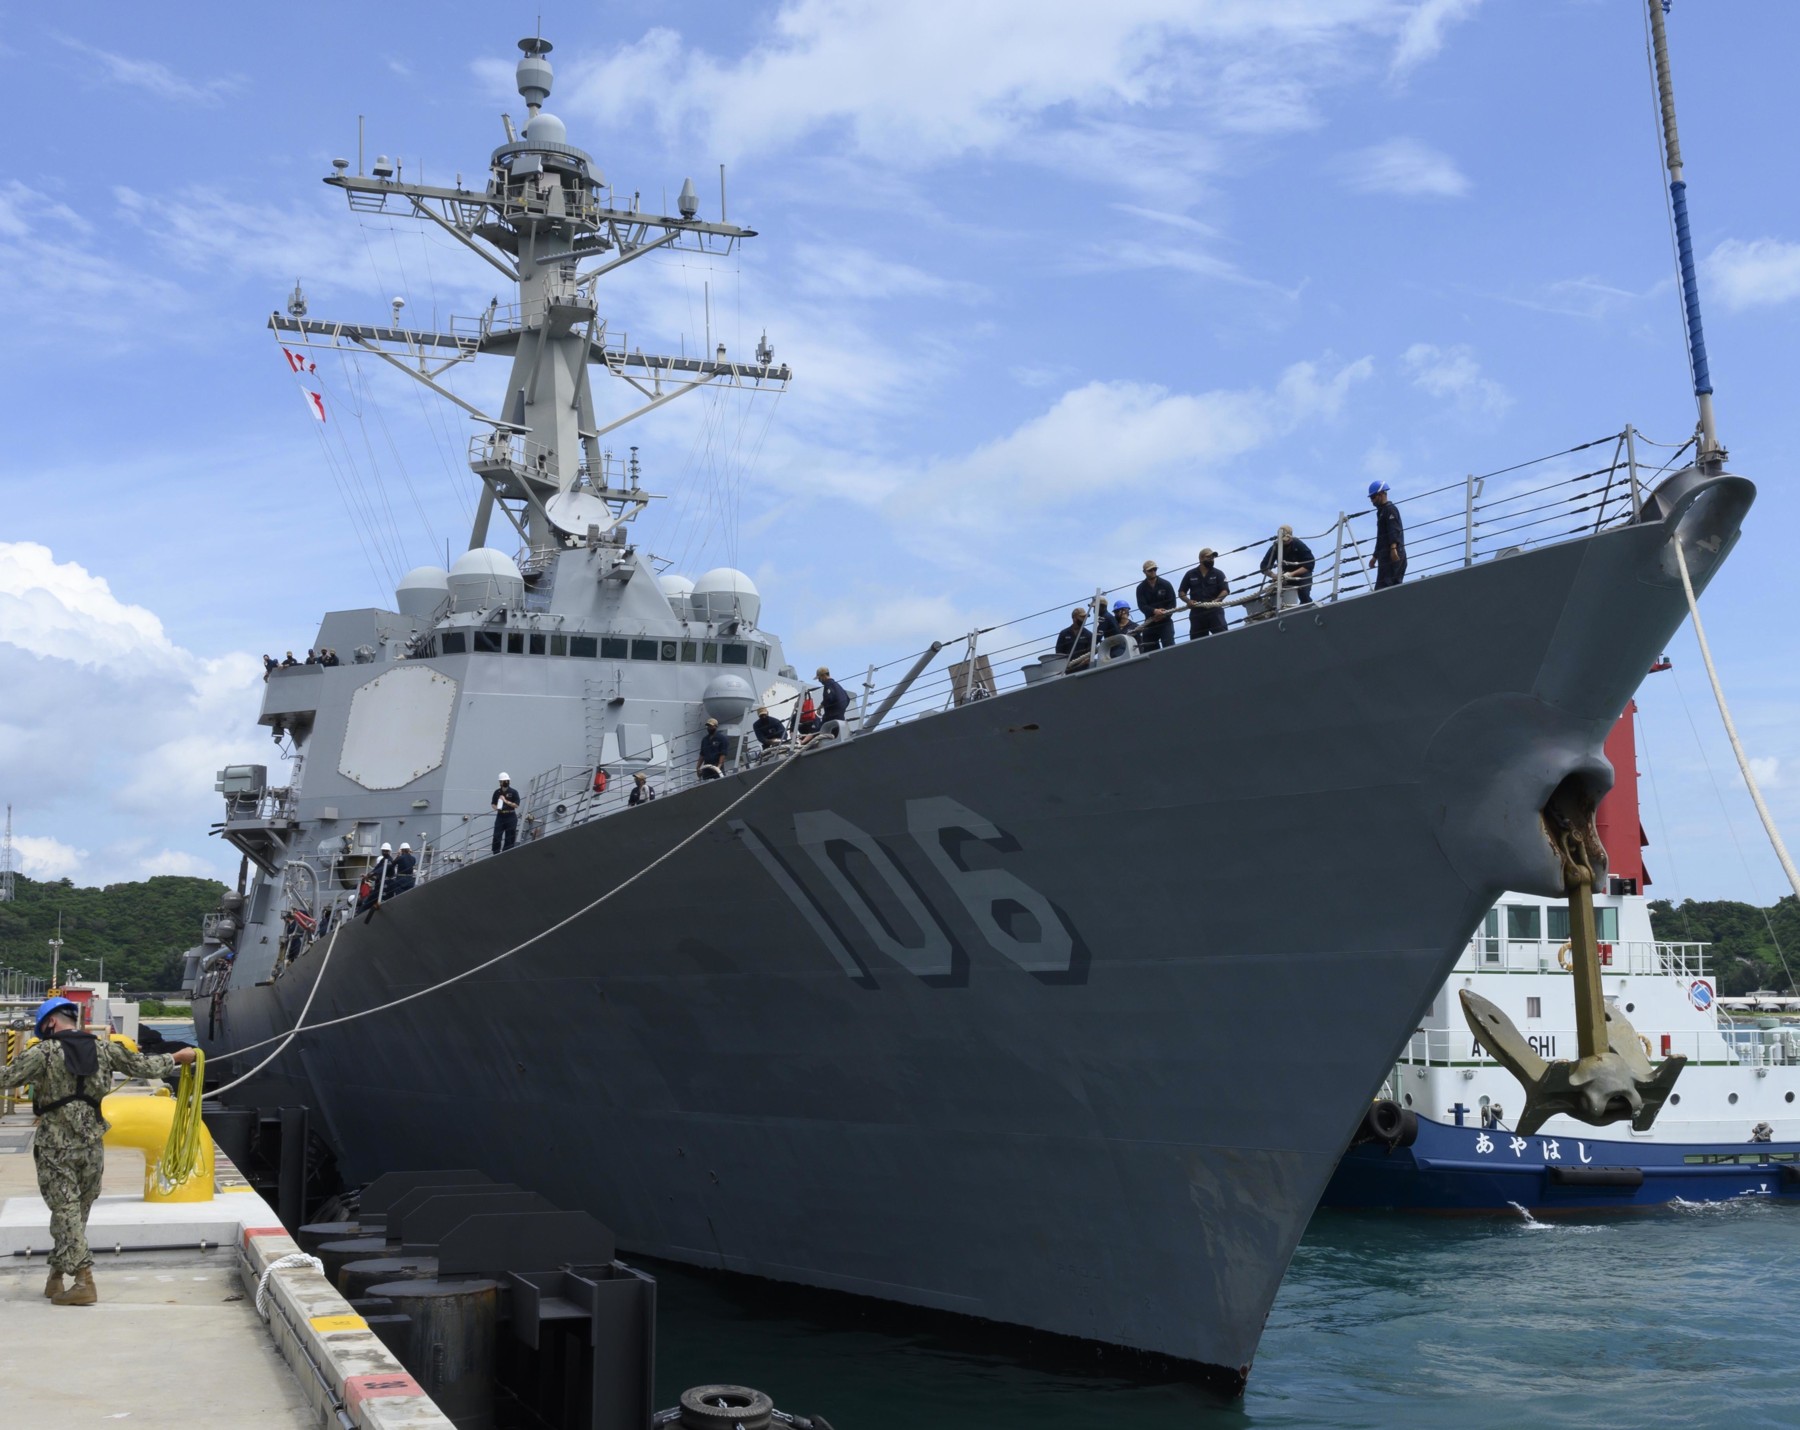 ddg-106 uss stockdale arleigh burke class guided missile destroyer aegis us navy naval facility white beach okinawa 139